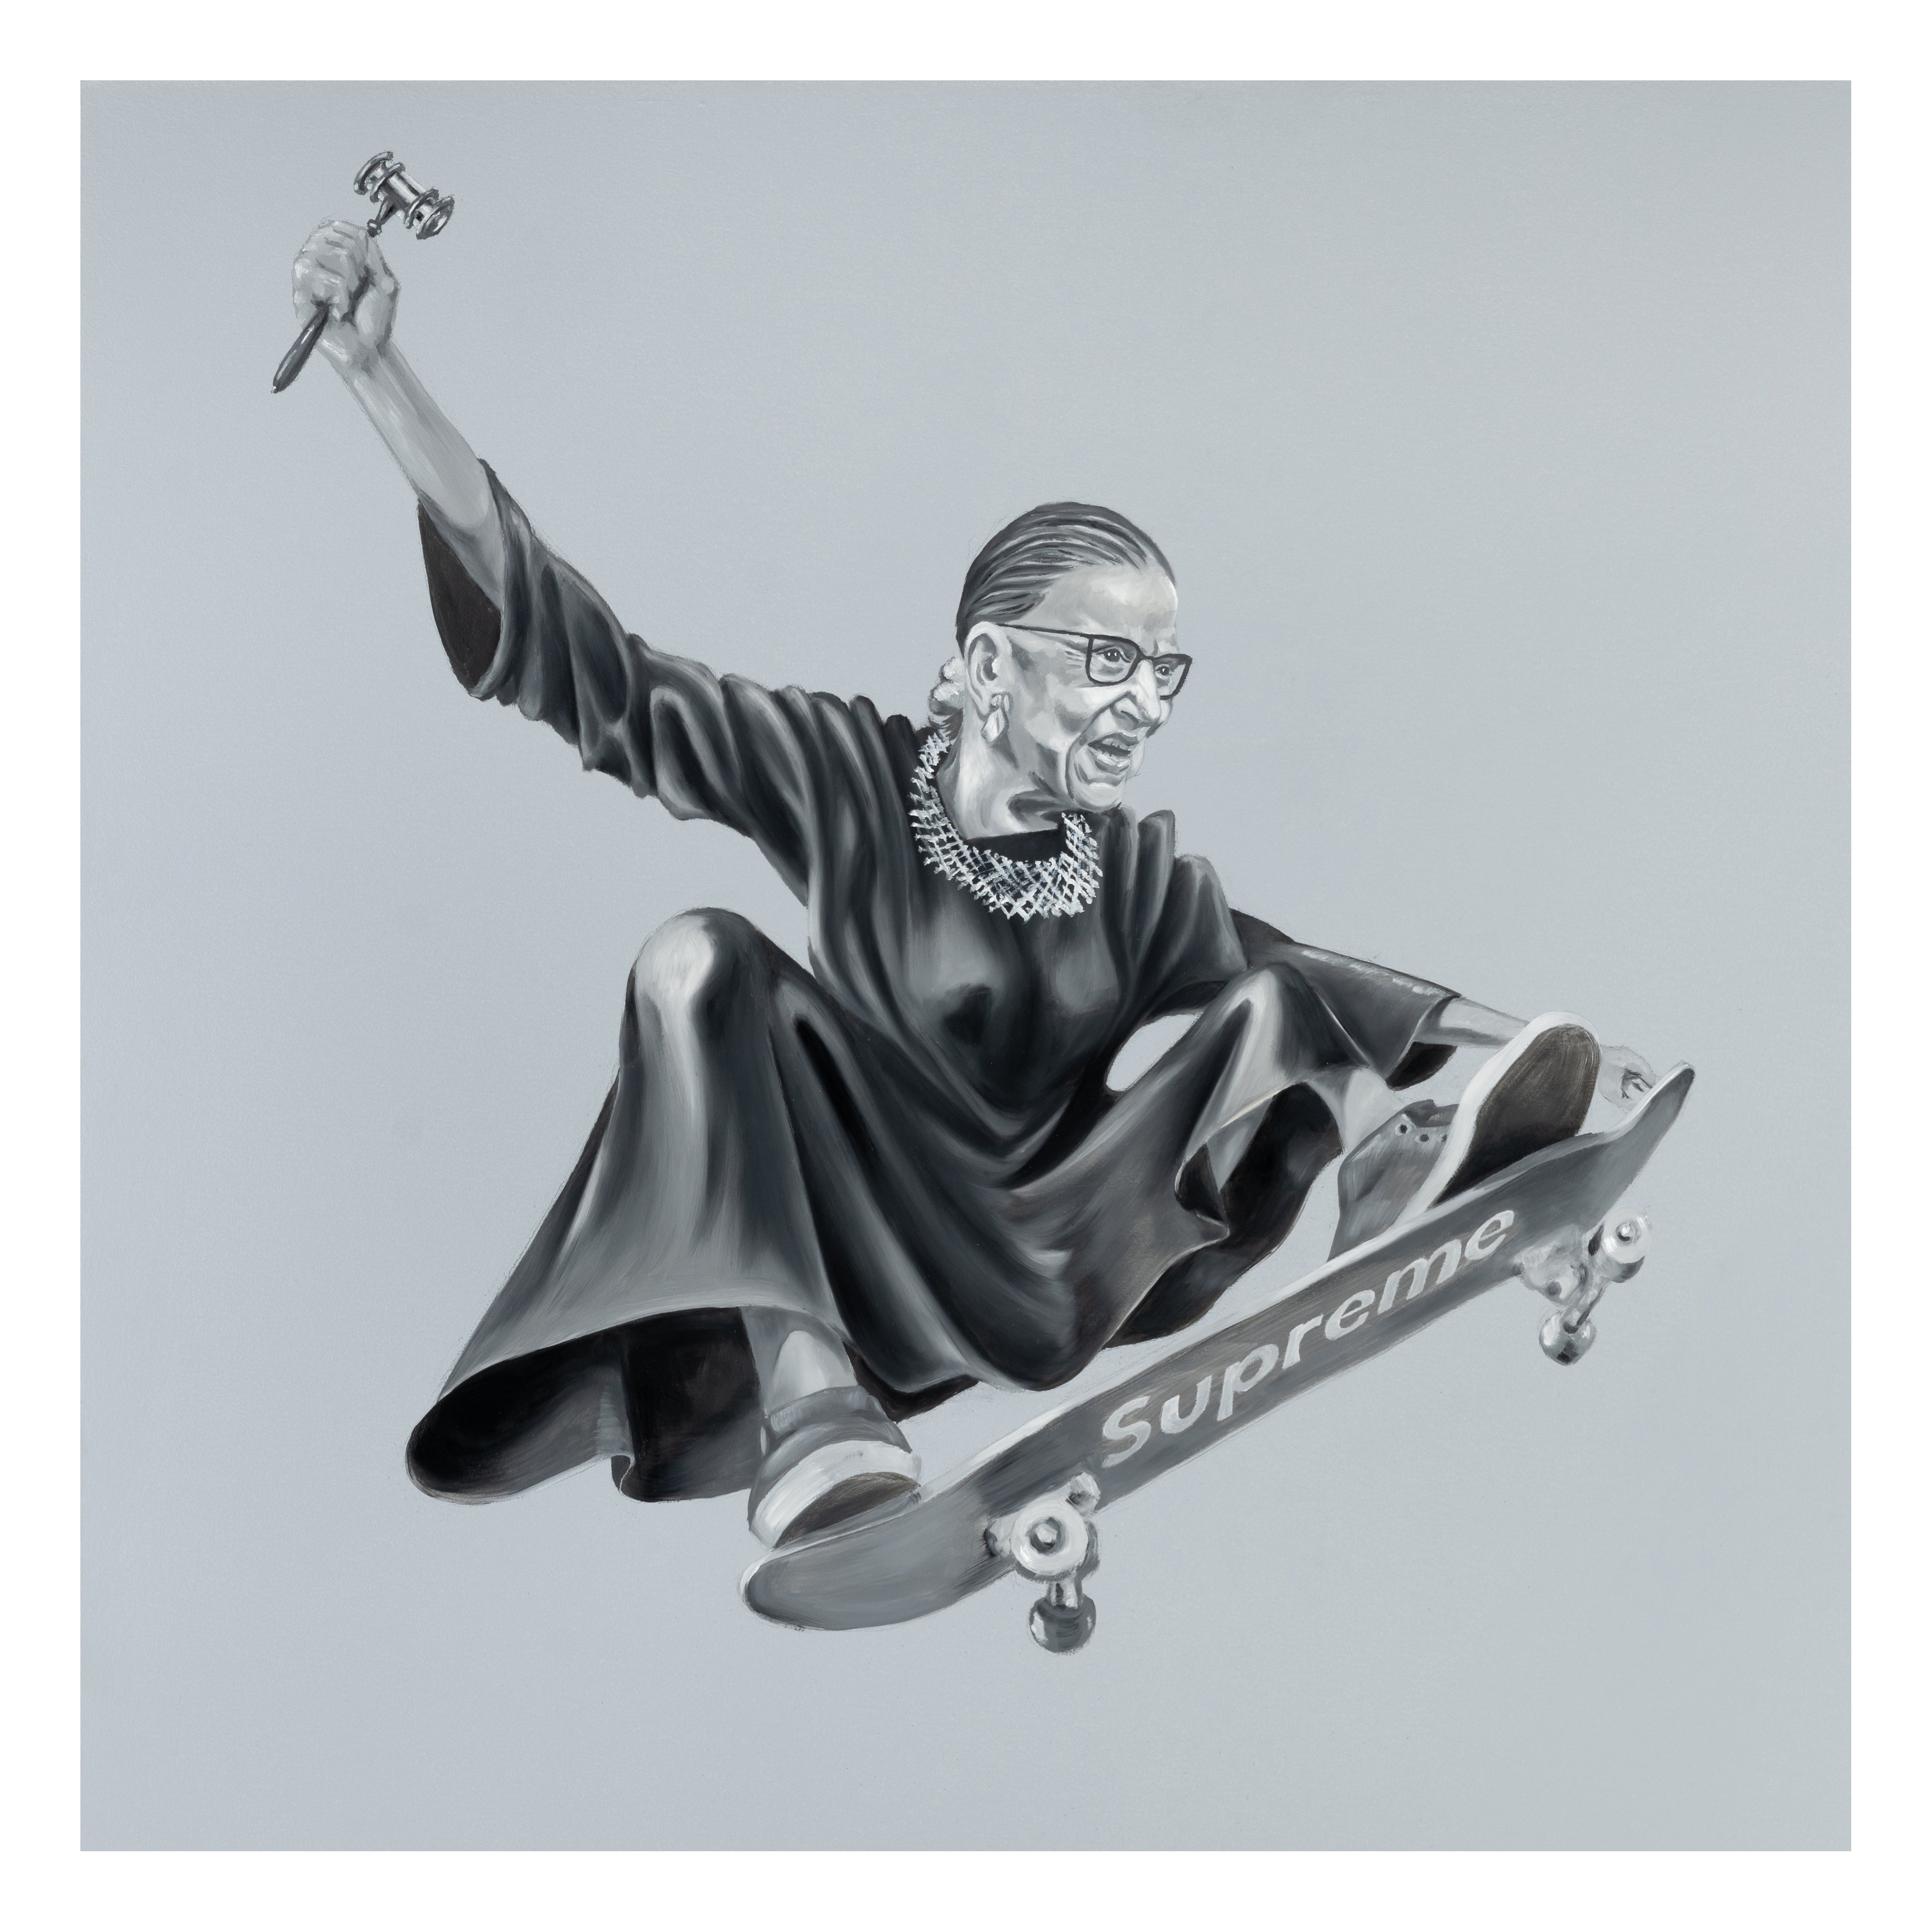 NEW SIZE // PRE-ORDER // 14" x 14" Ruth "Skater" Ginsburg LIMITED Edition Print